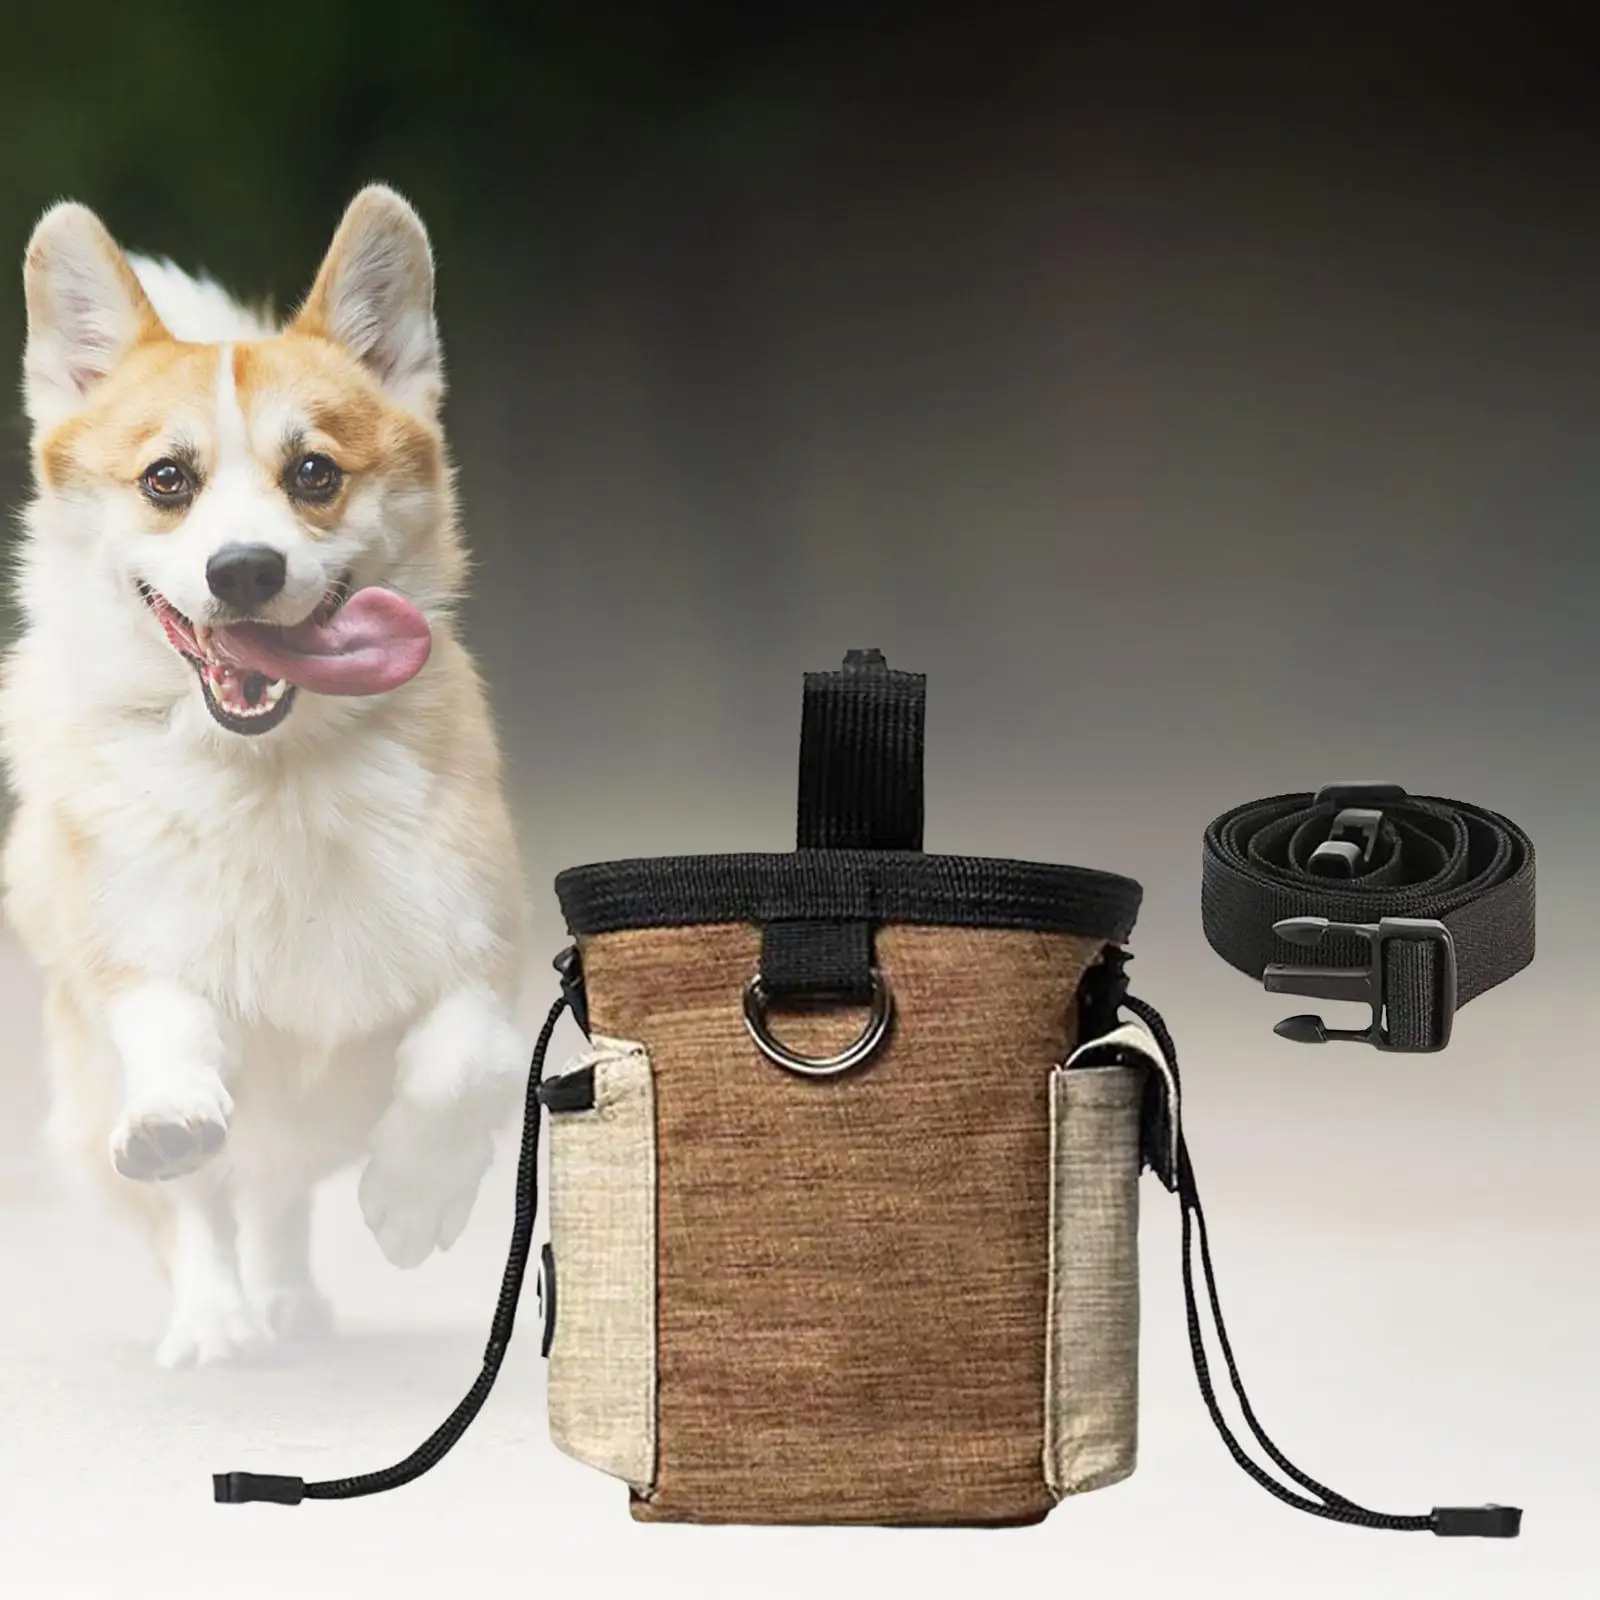 Treat Dog Pouch with Waist Shoulder Strap Fanny Pack Carrier Drawstring Dog Training Bag for Travel Walking Hiking Toys Pet